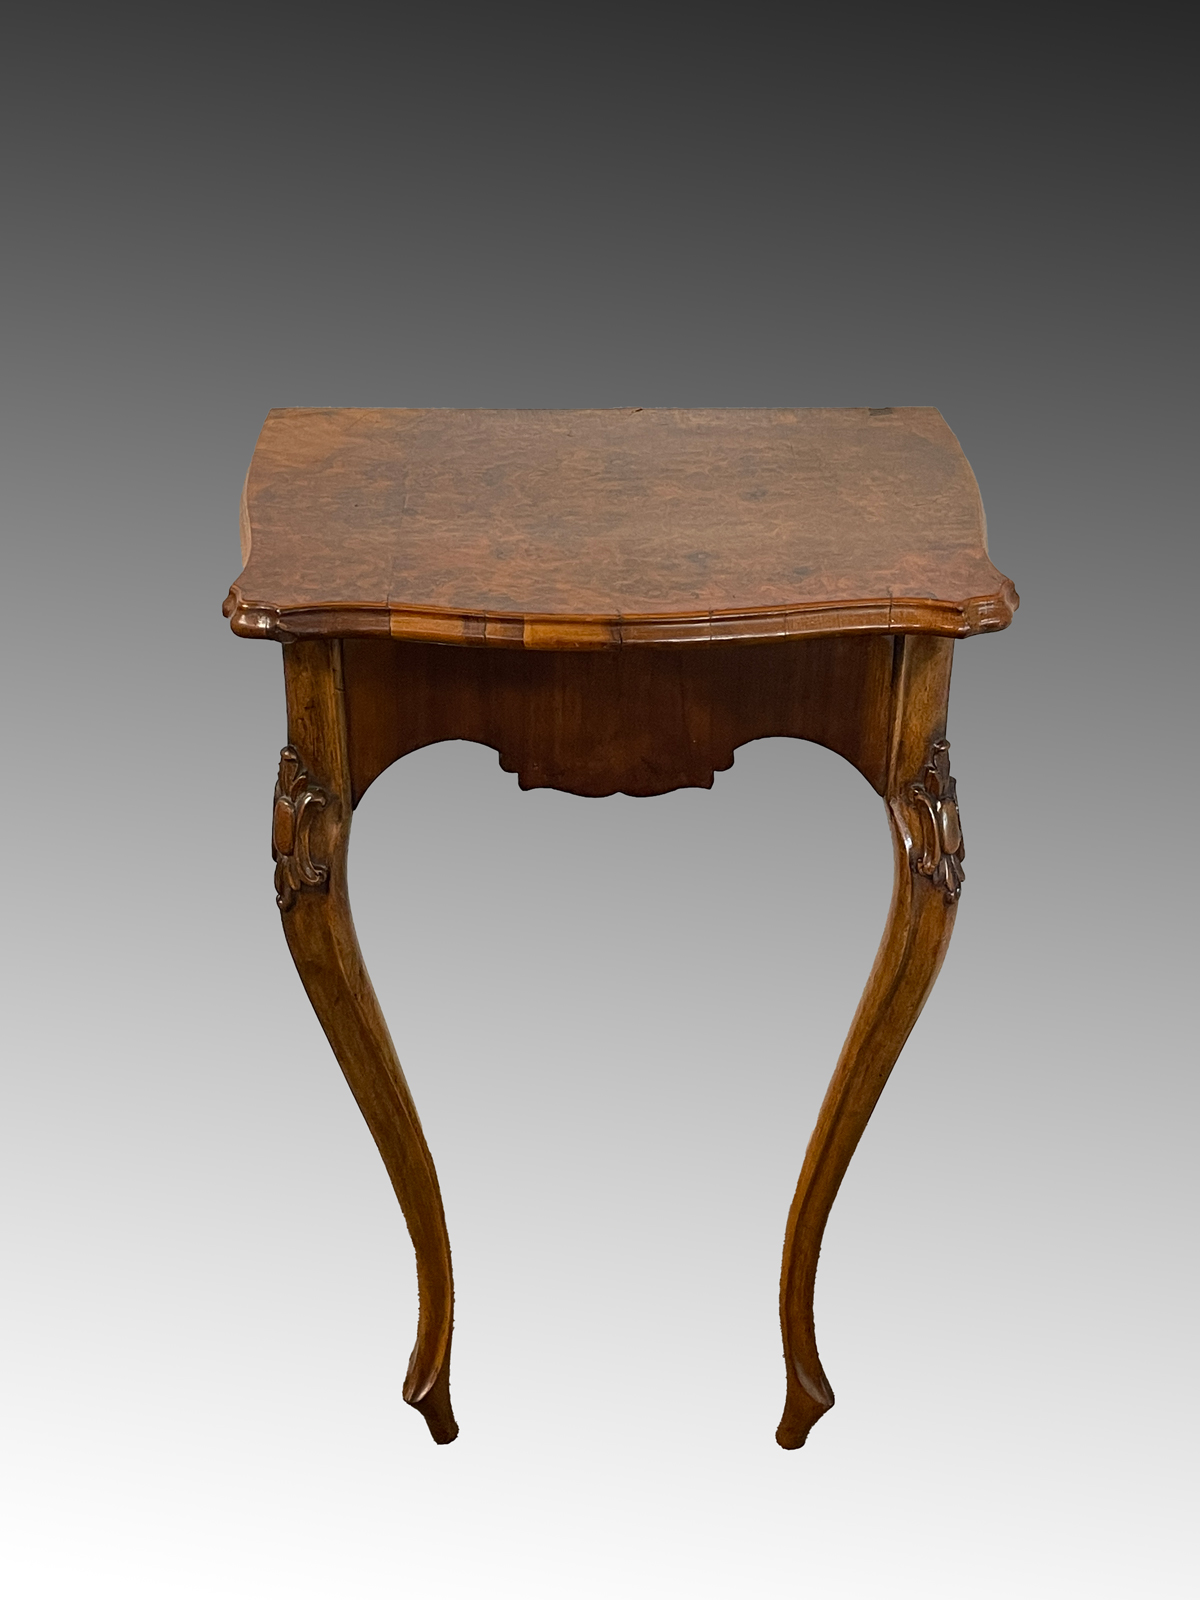 18TH-CENTURY WALL-MOUNT CONSOLE